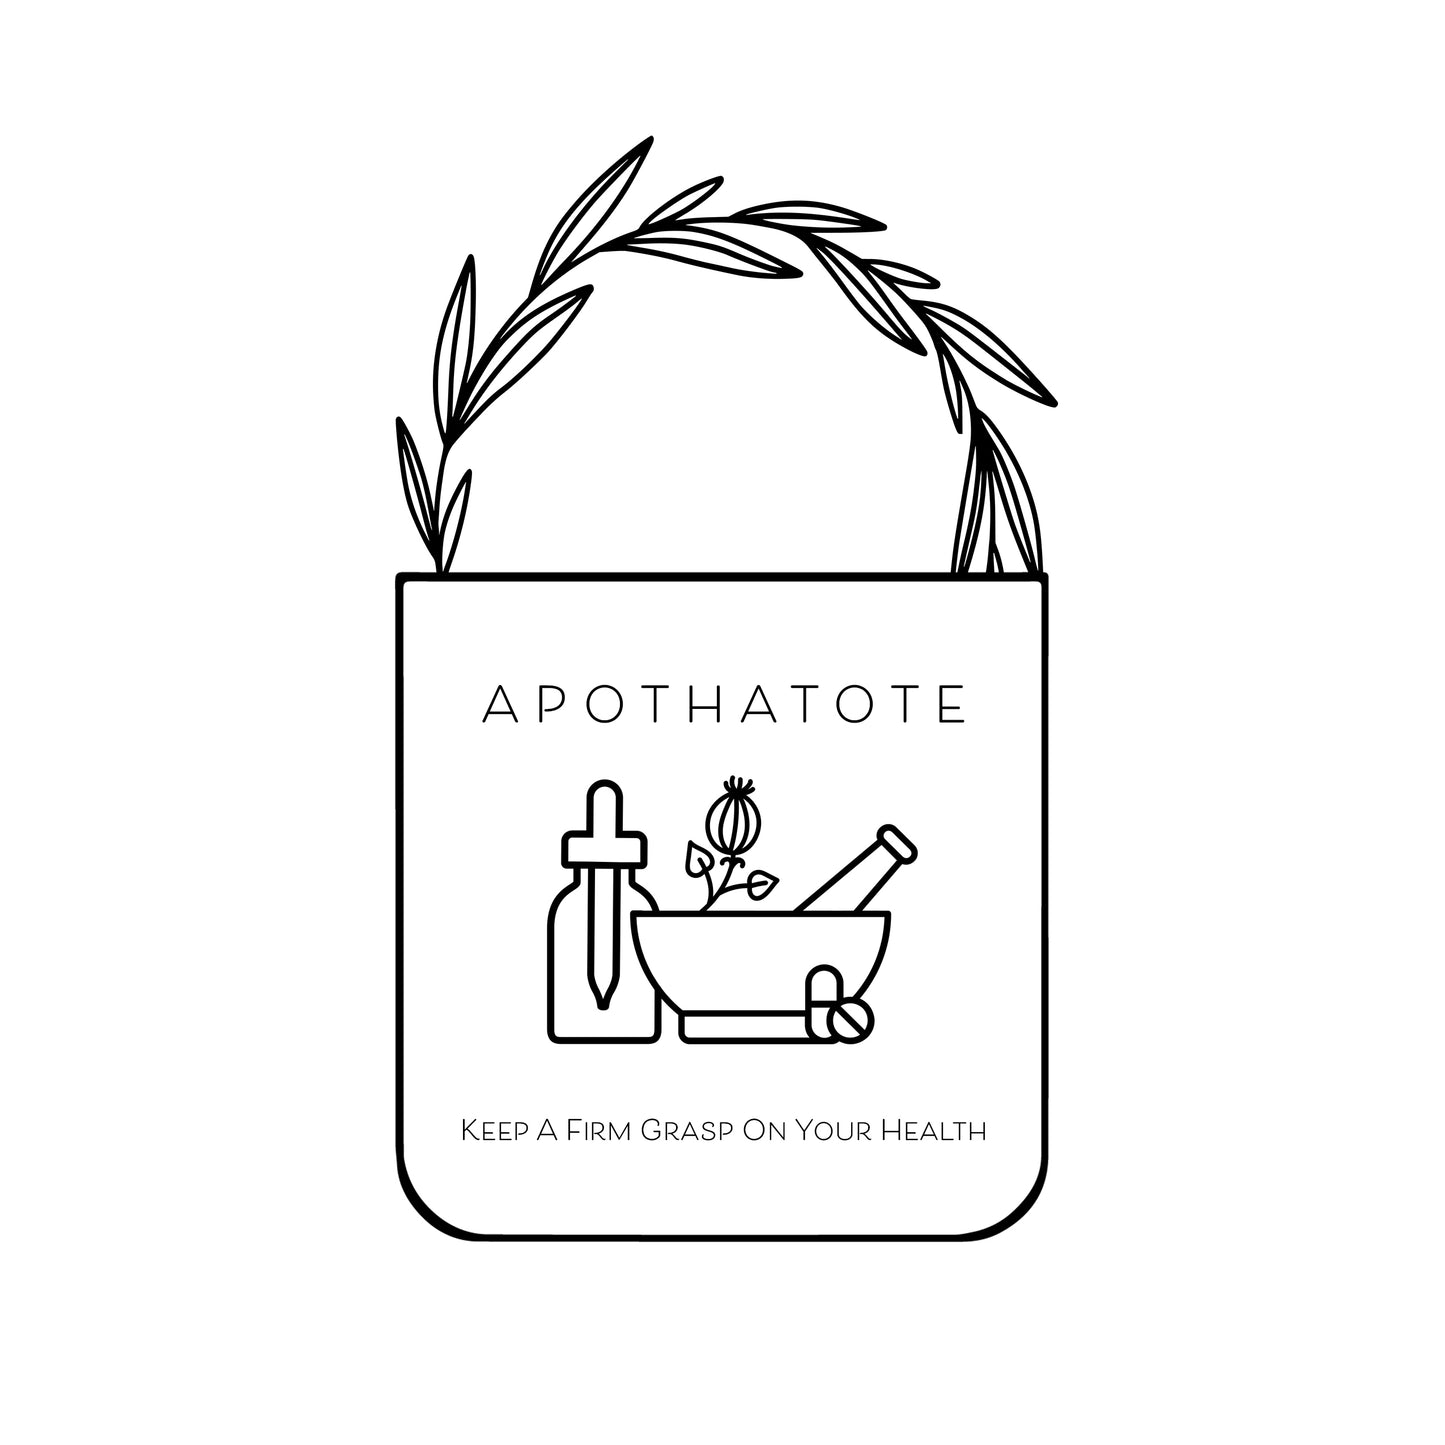 Certified Organic Herbs from APOTHATOTE